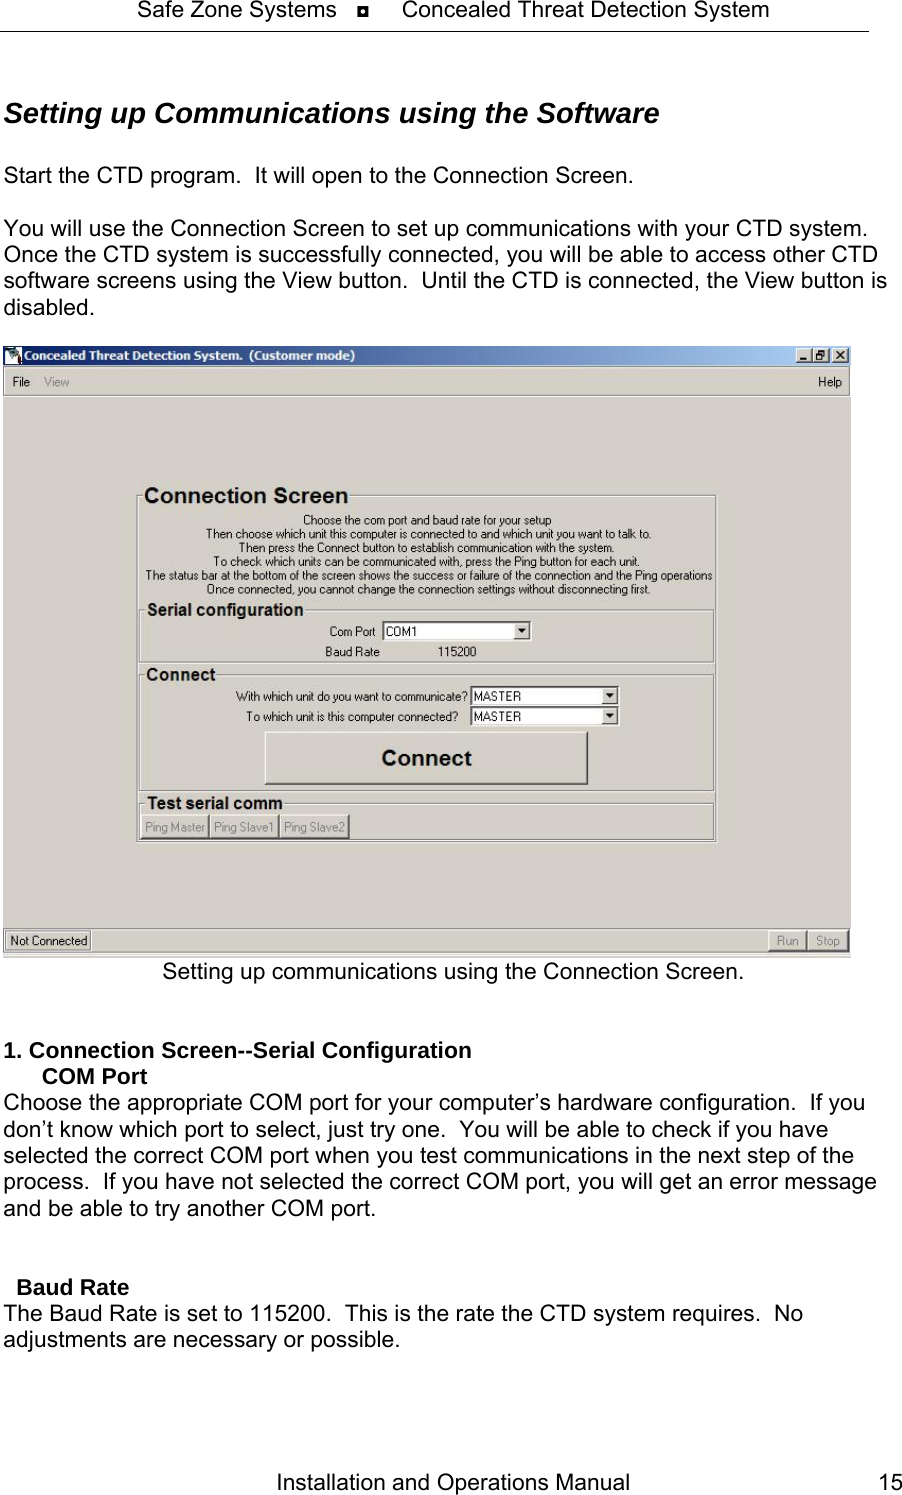 Safe Zone Systems   ◘     Concealed Threat Detection System  Setting up Communications using the Software  Start the CTD program.  It will open to the Connection Screen.    You will use the Connection Screen to set up communications with your CTD system. Once the CTD system is successfully connected, you will be able to access other CTD software screens using the View button.  Until the CTD is connected, the View button is disabled.       Setting up communications using the Connection Screen.   1. Connection Screen--Serial Configuration       COM Port Choose the appropriate COM port for your computer’s hardware configuration.  If you don’t know which port to select, just try one.  You will be able to check if you have selected the correct COM port when you test communications in the next step of the process.  If you have not selected the correct COM port, you will get an error message and be able to try another COM port.     Baud Rate The Baud Rate is set to 115200.  This is the rate the CTD system requires.  No adjustments are necessary or possible. Installation and Operations Manual  15